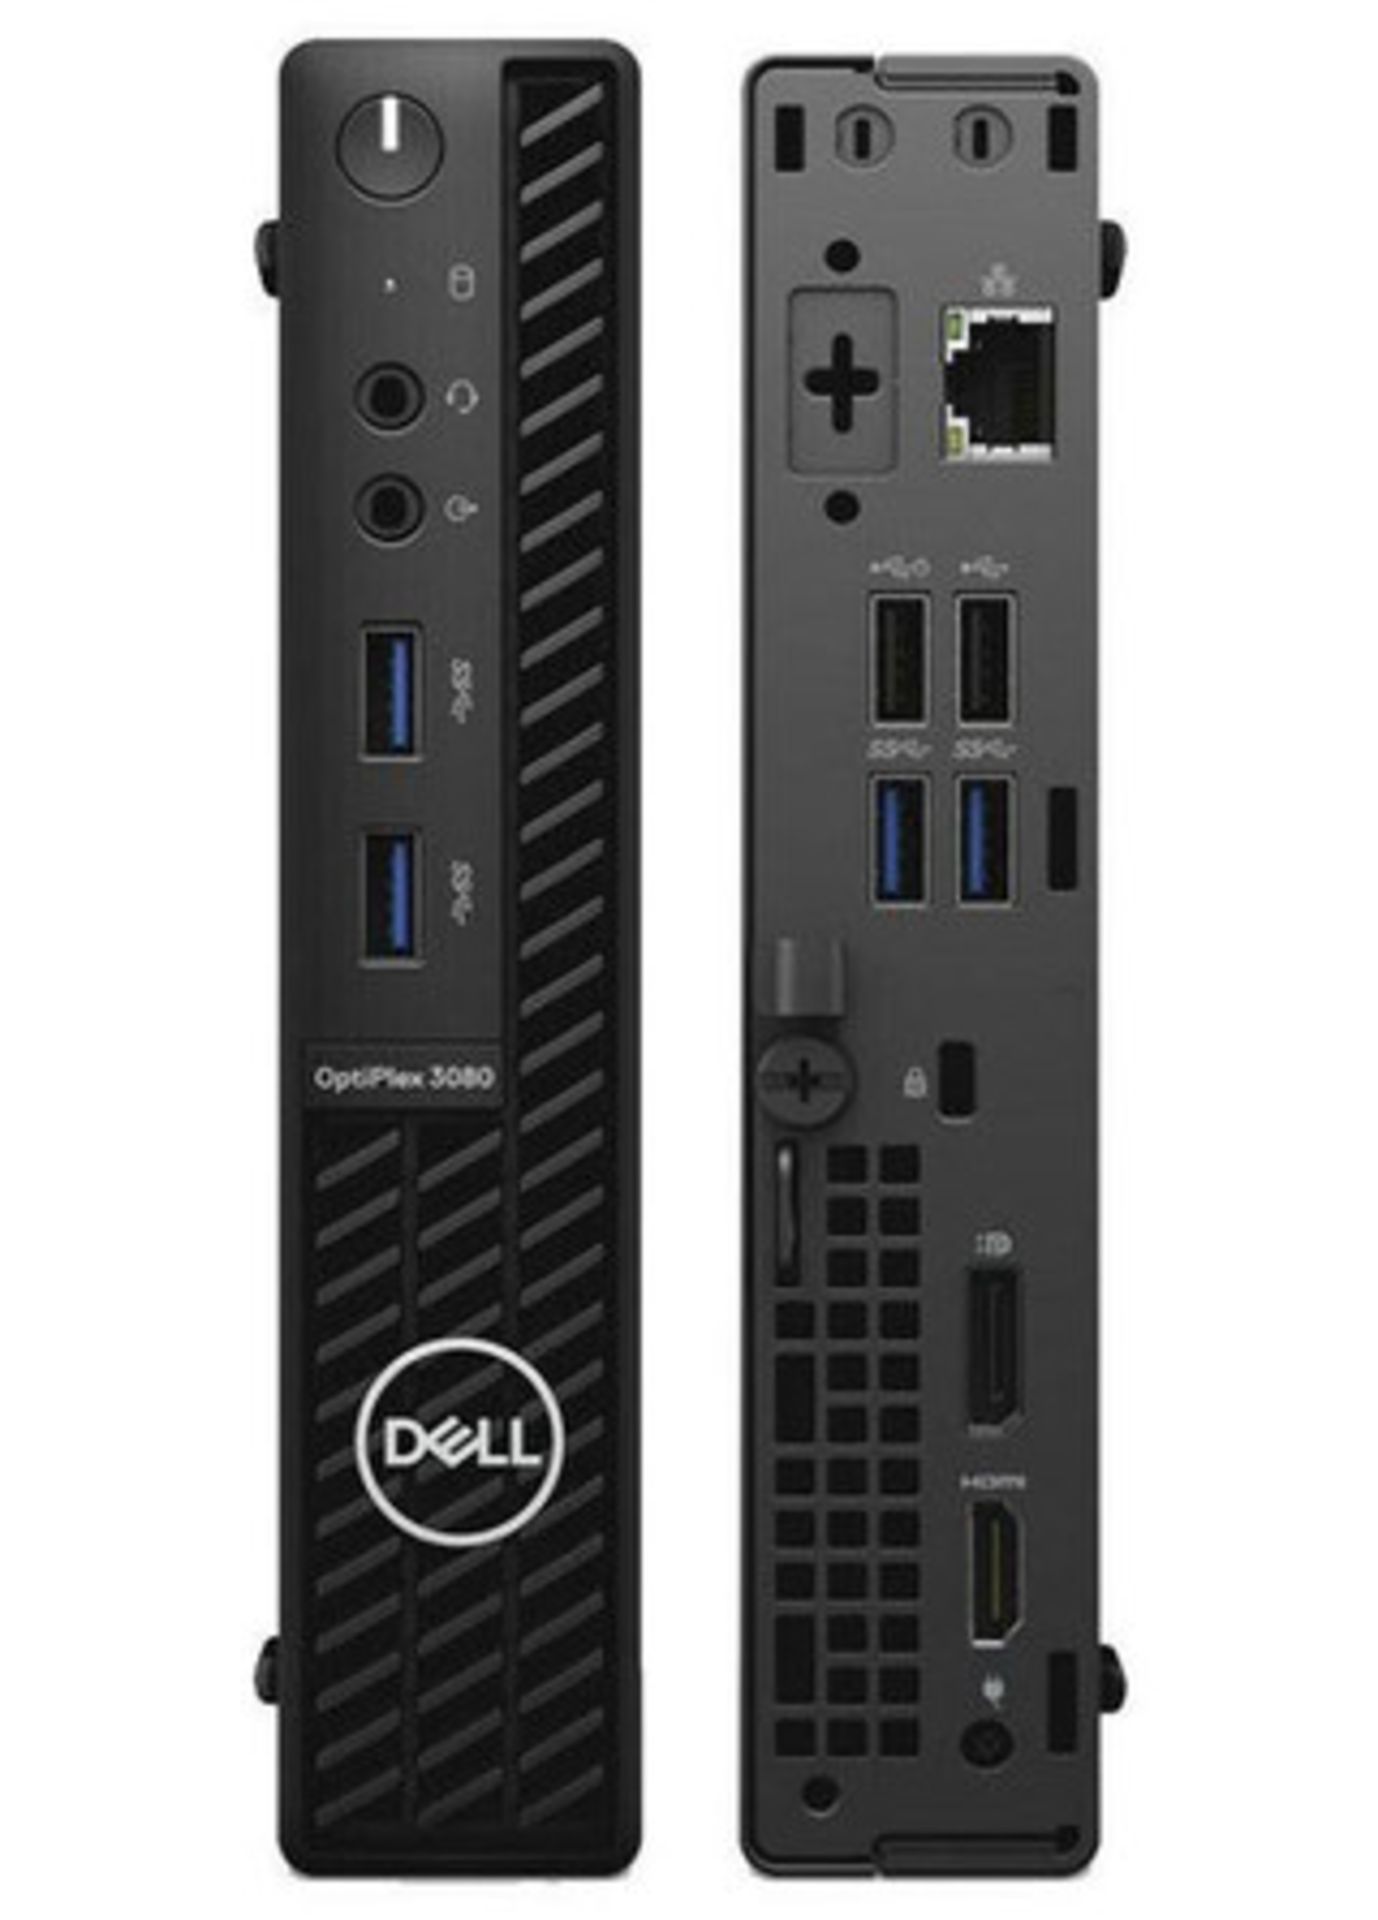 DELL OPTIPLEX 3080 USFF PC WITH INTEL I5-10500T CPU, 16GB RAM, 256GB SSD (DATA WIPED AND WINDOWS - Image 2 of 2